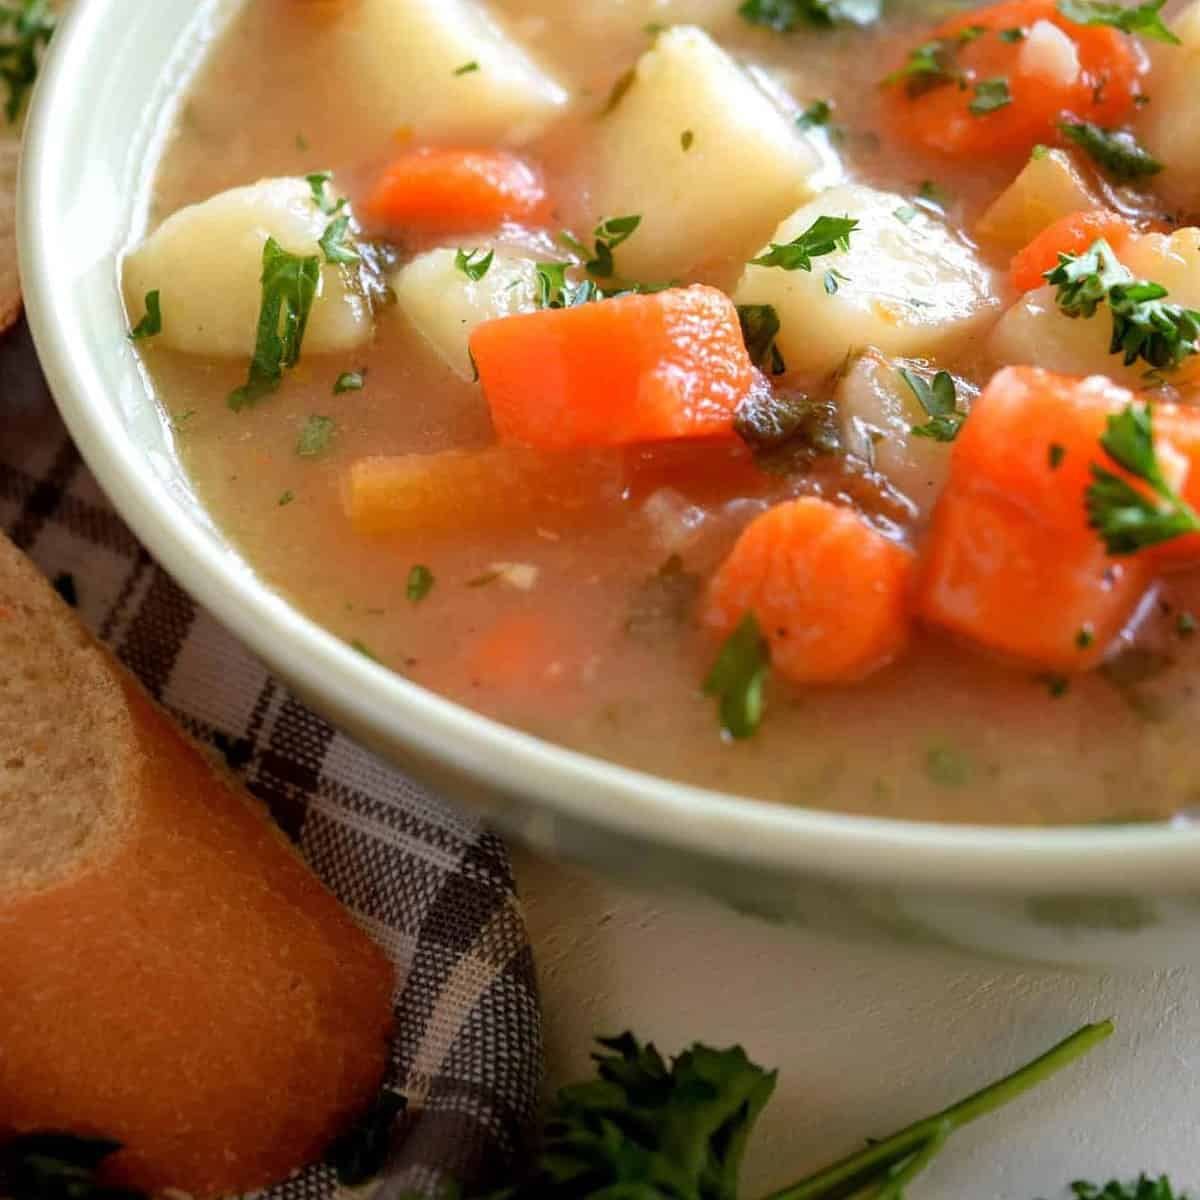  The perfect comfort food for a cold winter day, this soup will leave